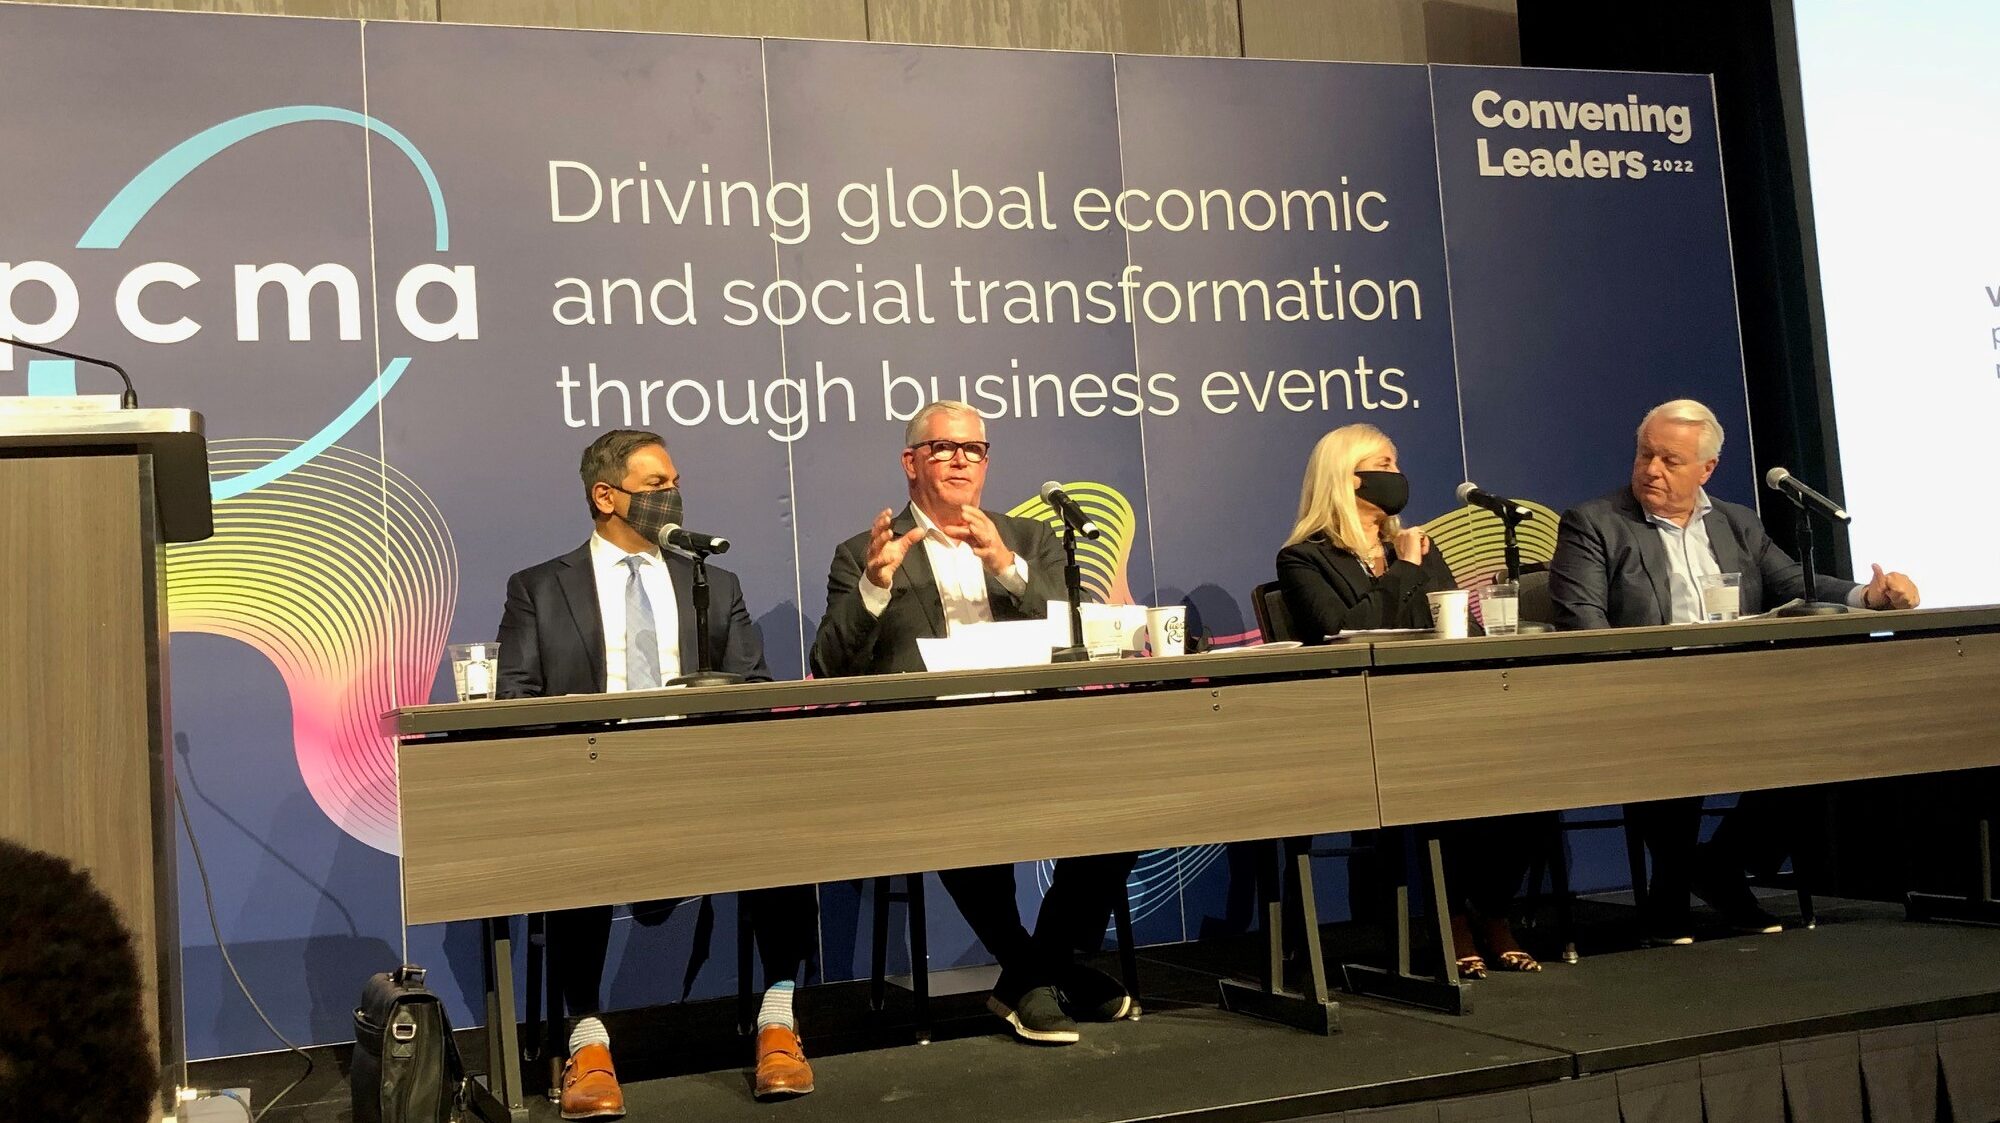 A panel of people speaking at PCMA. The board behind them reads, "Driving global economic and social transformation through business events."